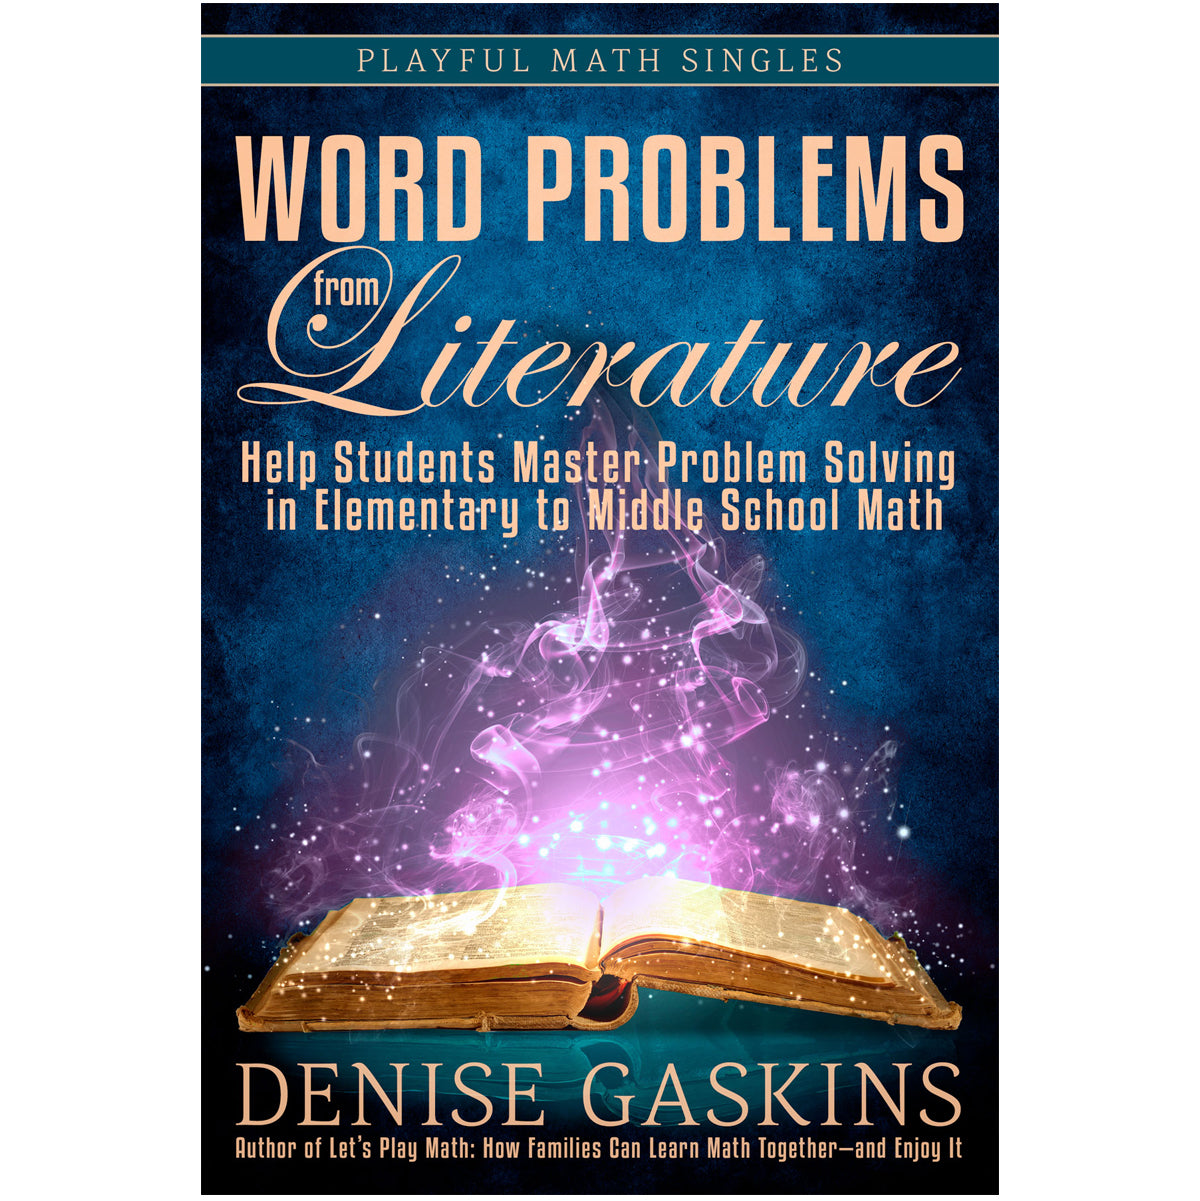 Word Problems from Literature problem-solving by Denise Gaskins